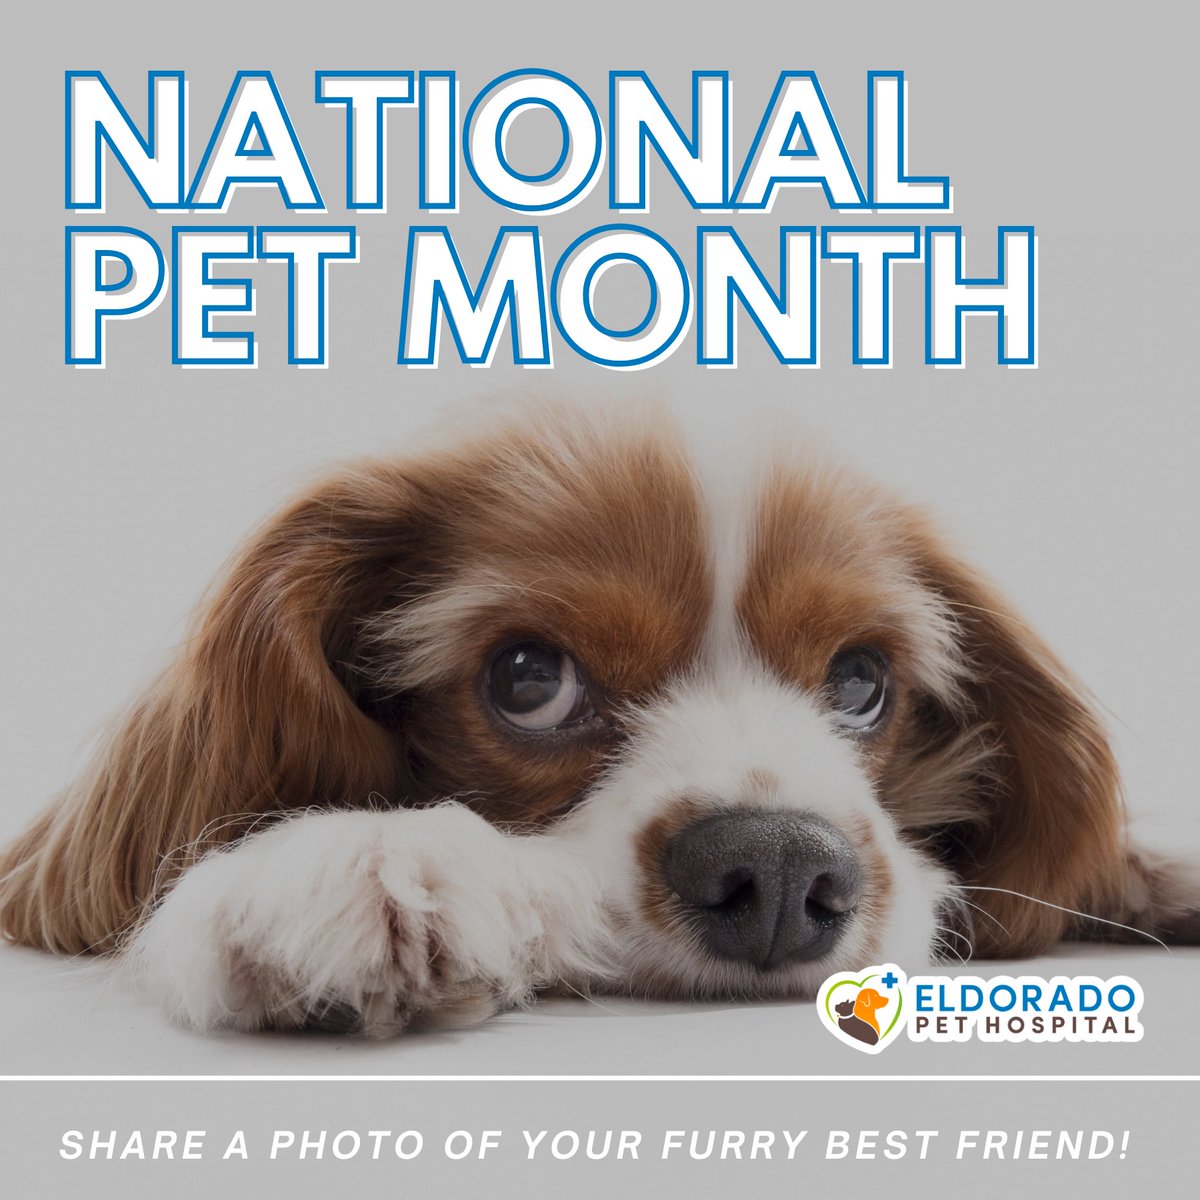 🐾 It's National Pet Month! 🎉 Show off your cuddly companion by sharing a photo of your furry best friend in the comments. Let's fill our feed with the faces of our beloved pets! #NationalPetMonth